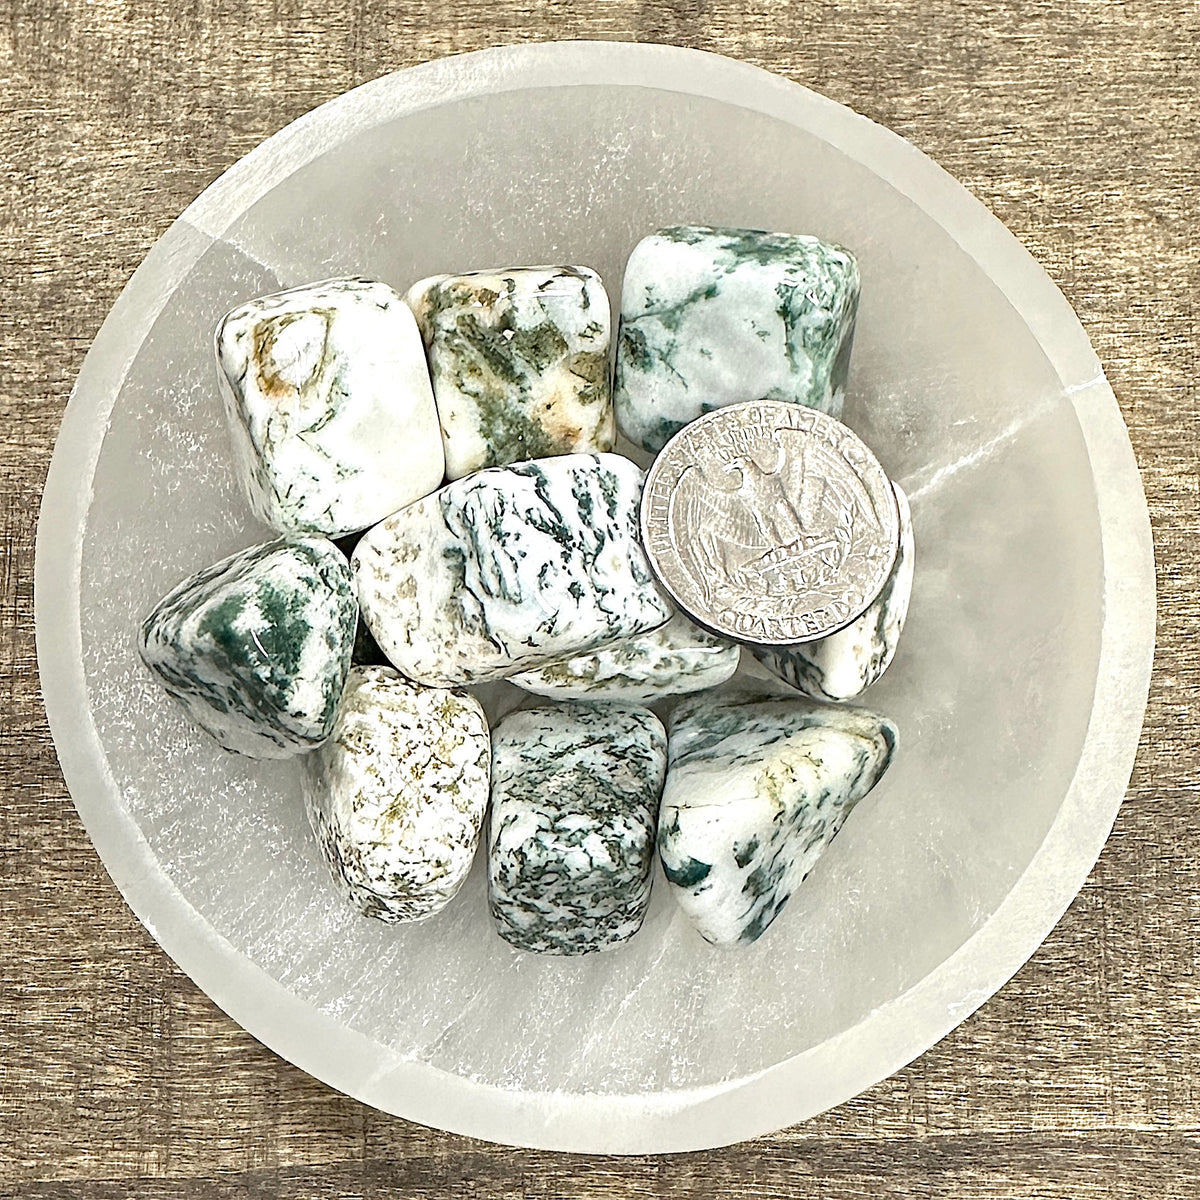 Overhead comparison shot of a US quarter coin and various Tree Agate tumbled stones in a small bowl.